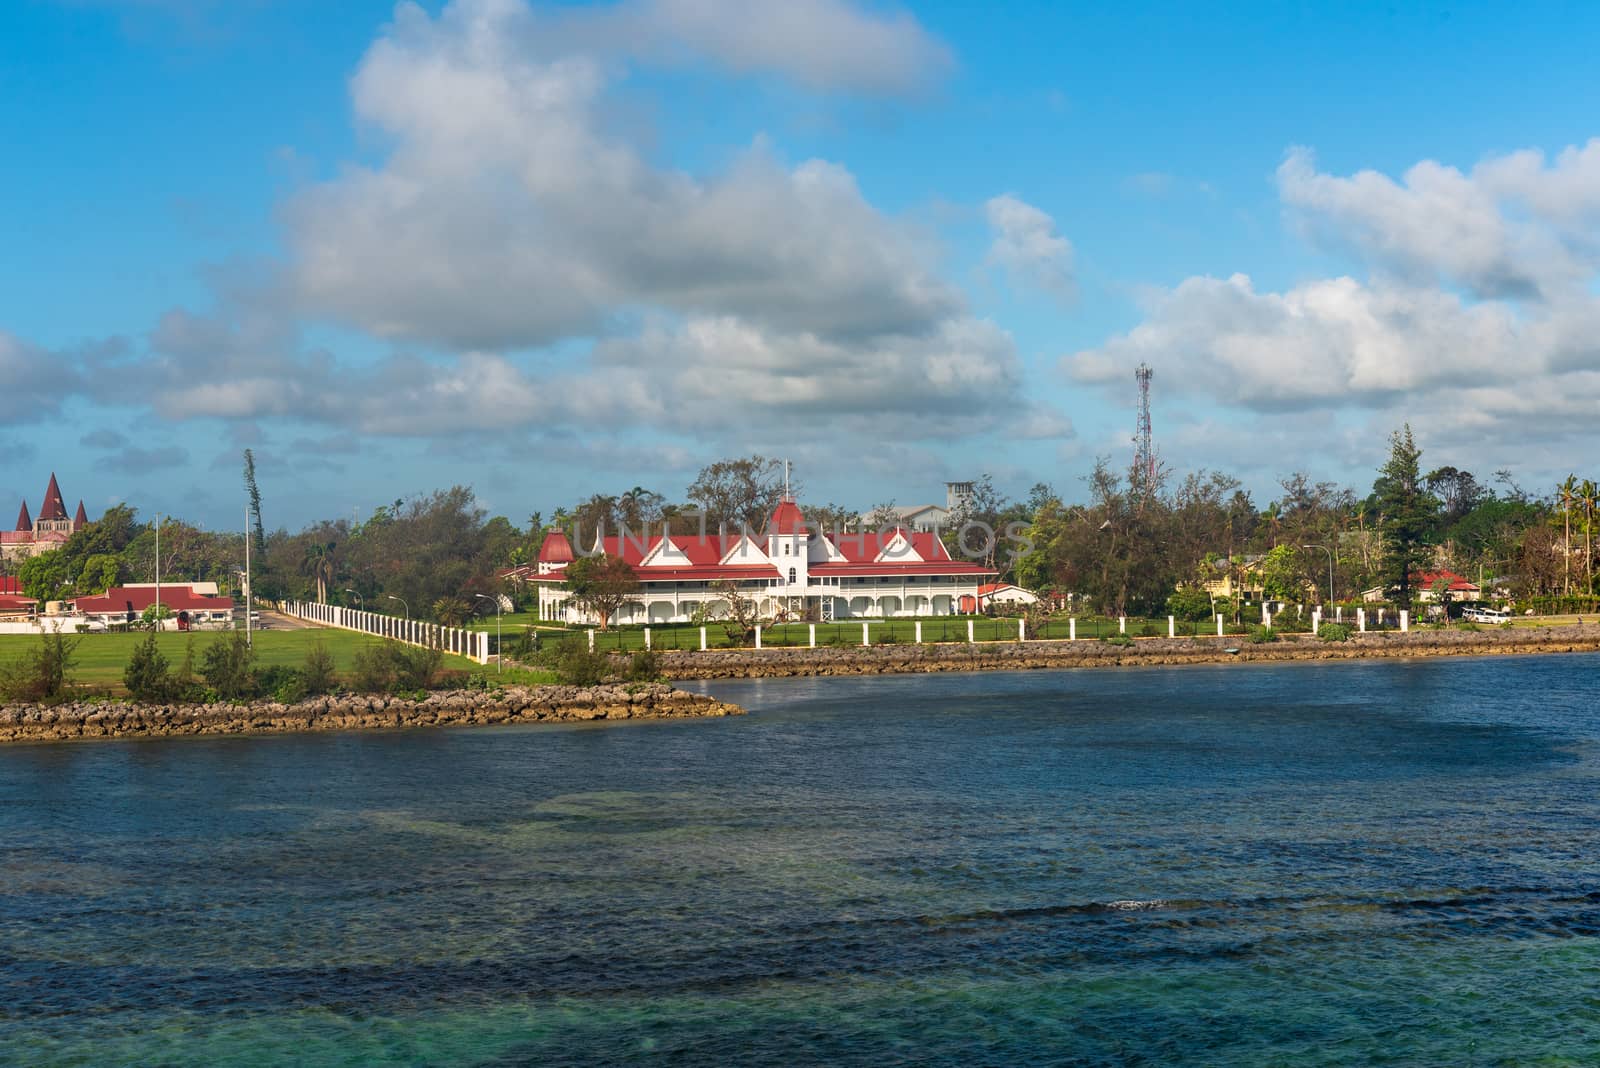 The Presidential Palace in Tonga, also known as the Royal Palace.